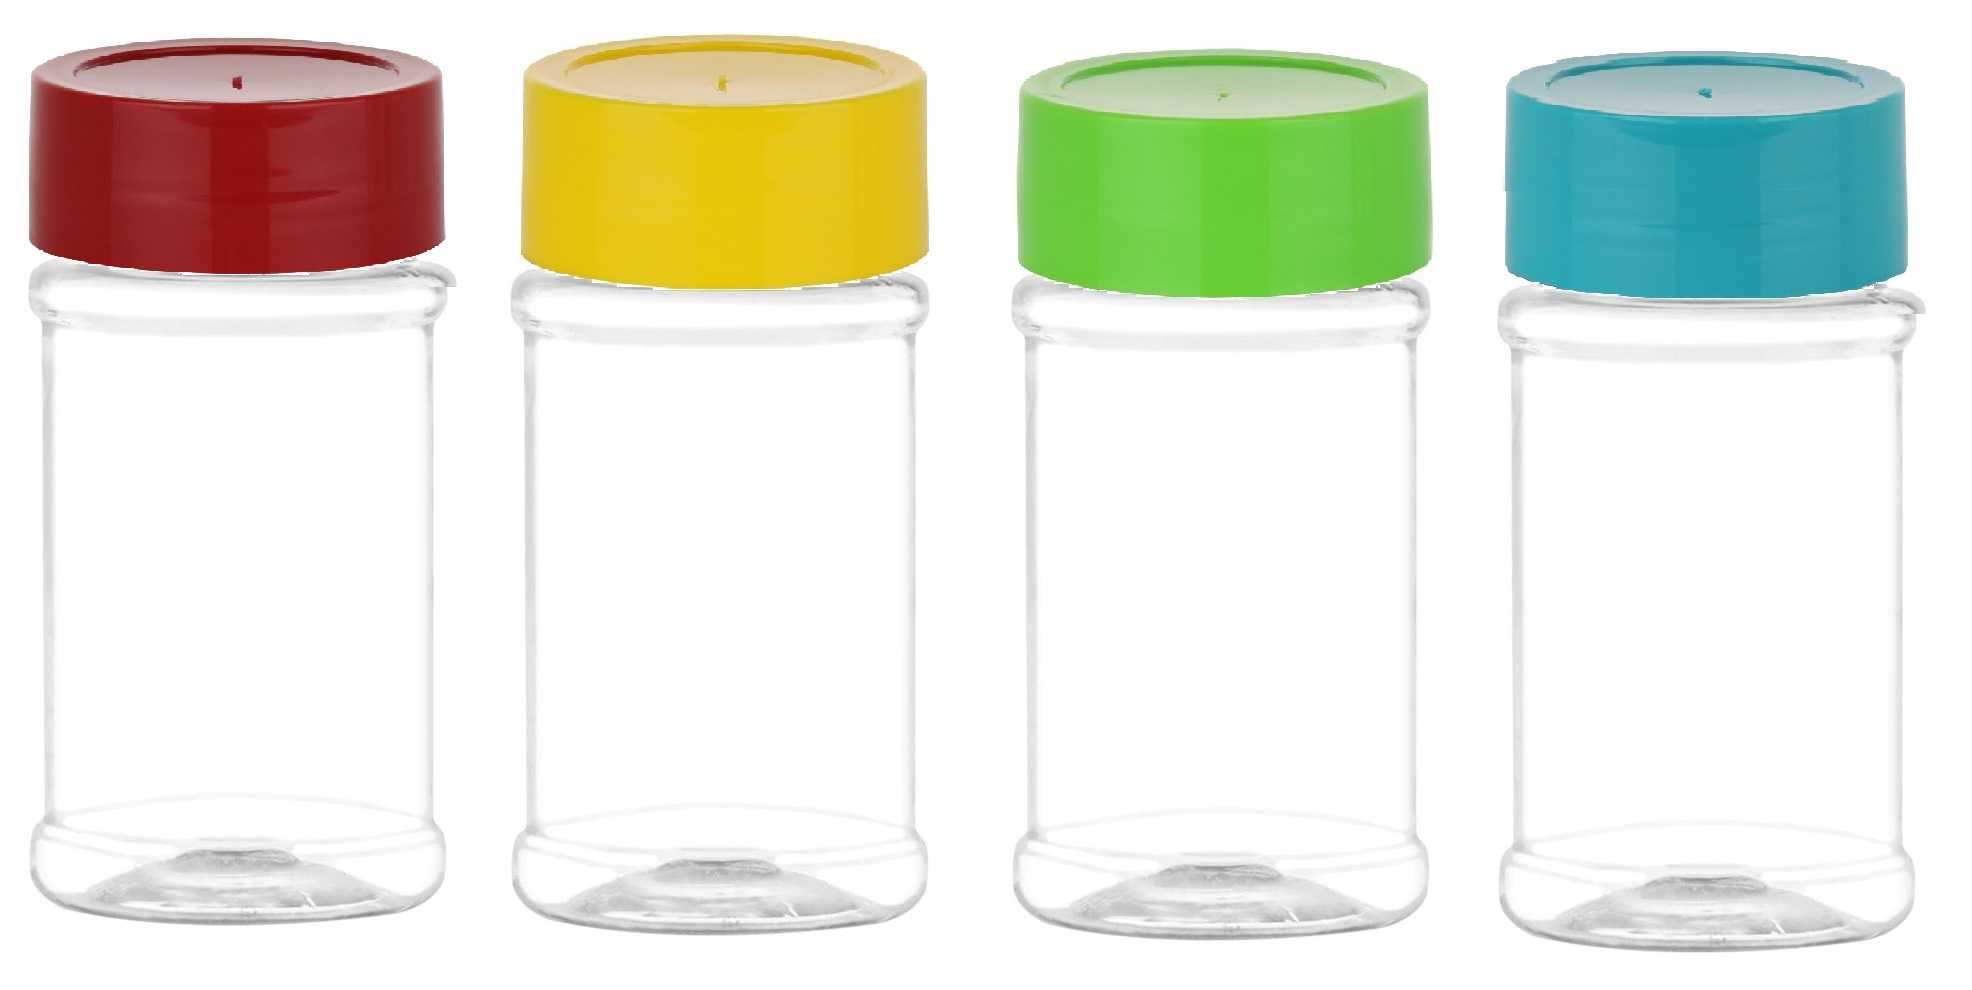 https://cdn11.bigcommerce.com/s-1ybtx/images/stencil/original/products/1290/6726/20-pcs-4-oz-PET-Plastic-Spice-Jars-with-Shake-and-Pour-Cap-in-your-color-choice-Made-in-USA_4655__70177.1699989128.jpg?c=2